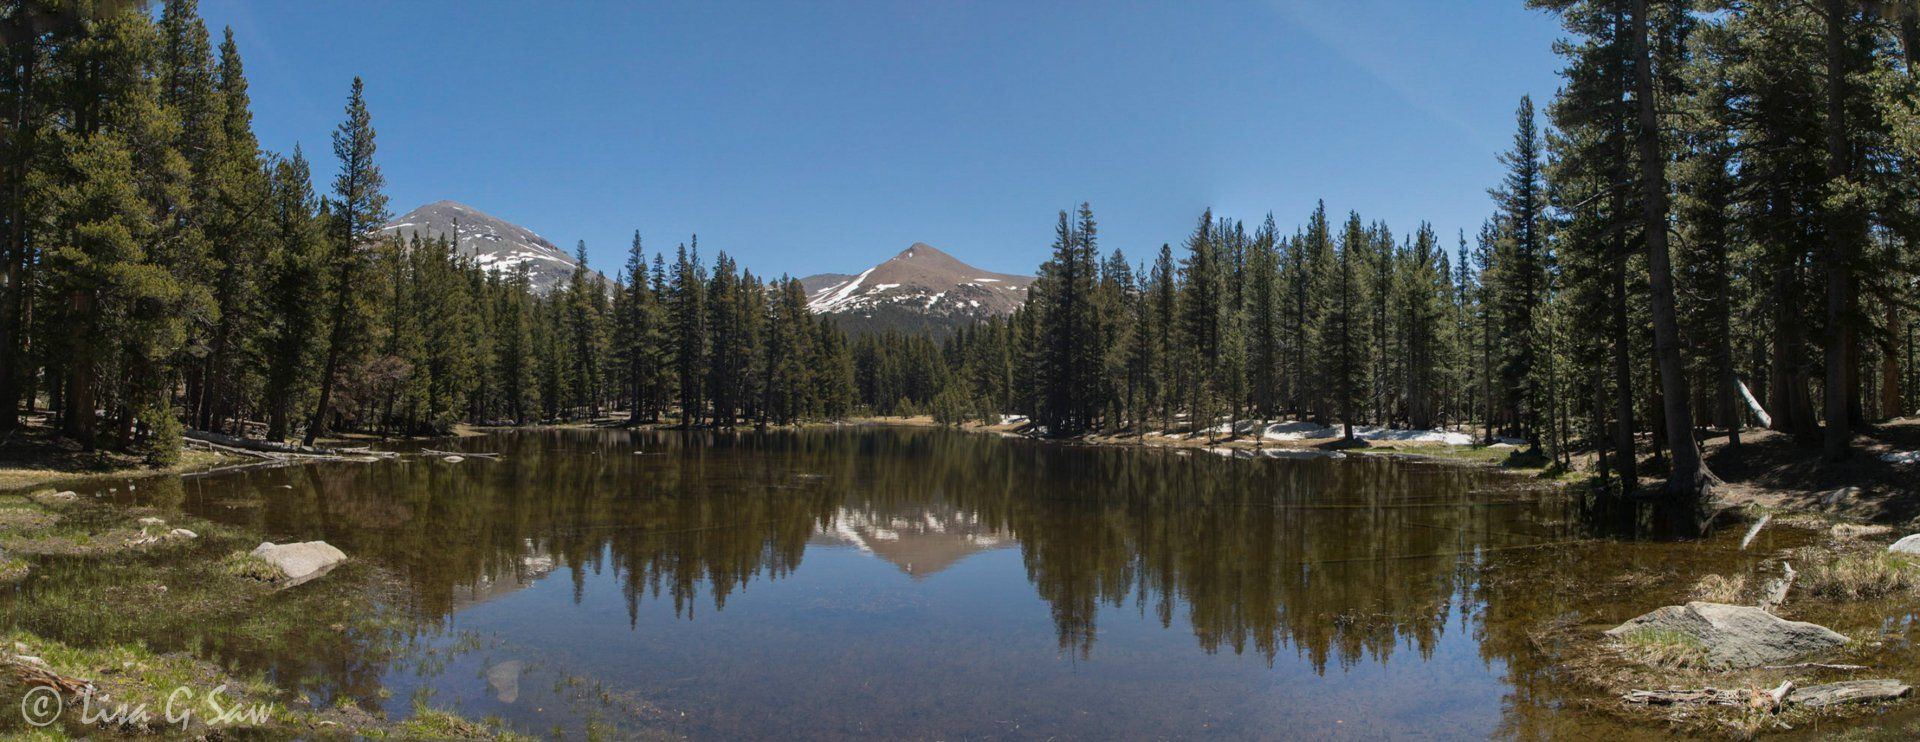 Reflections of mountain and pine trees in lake